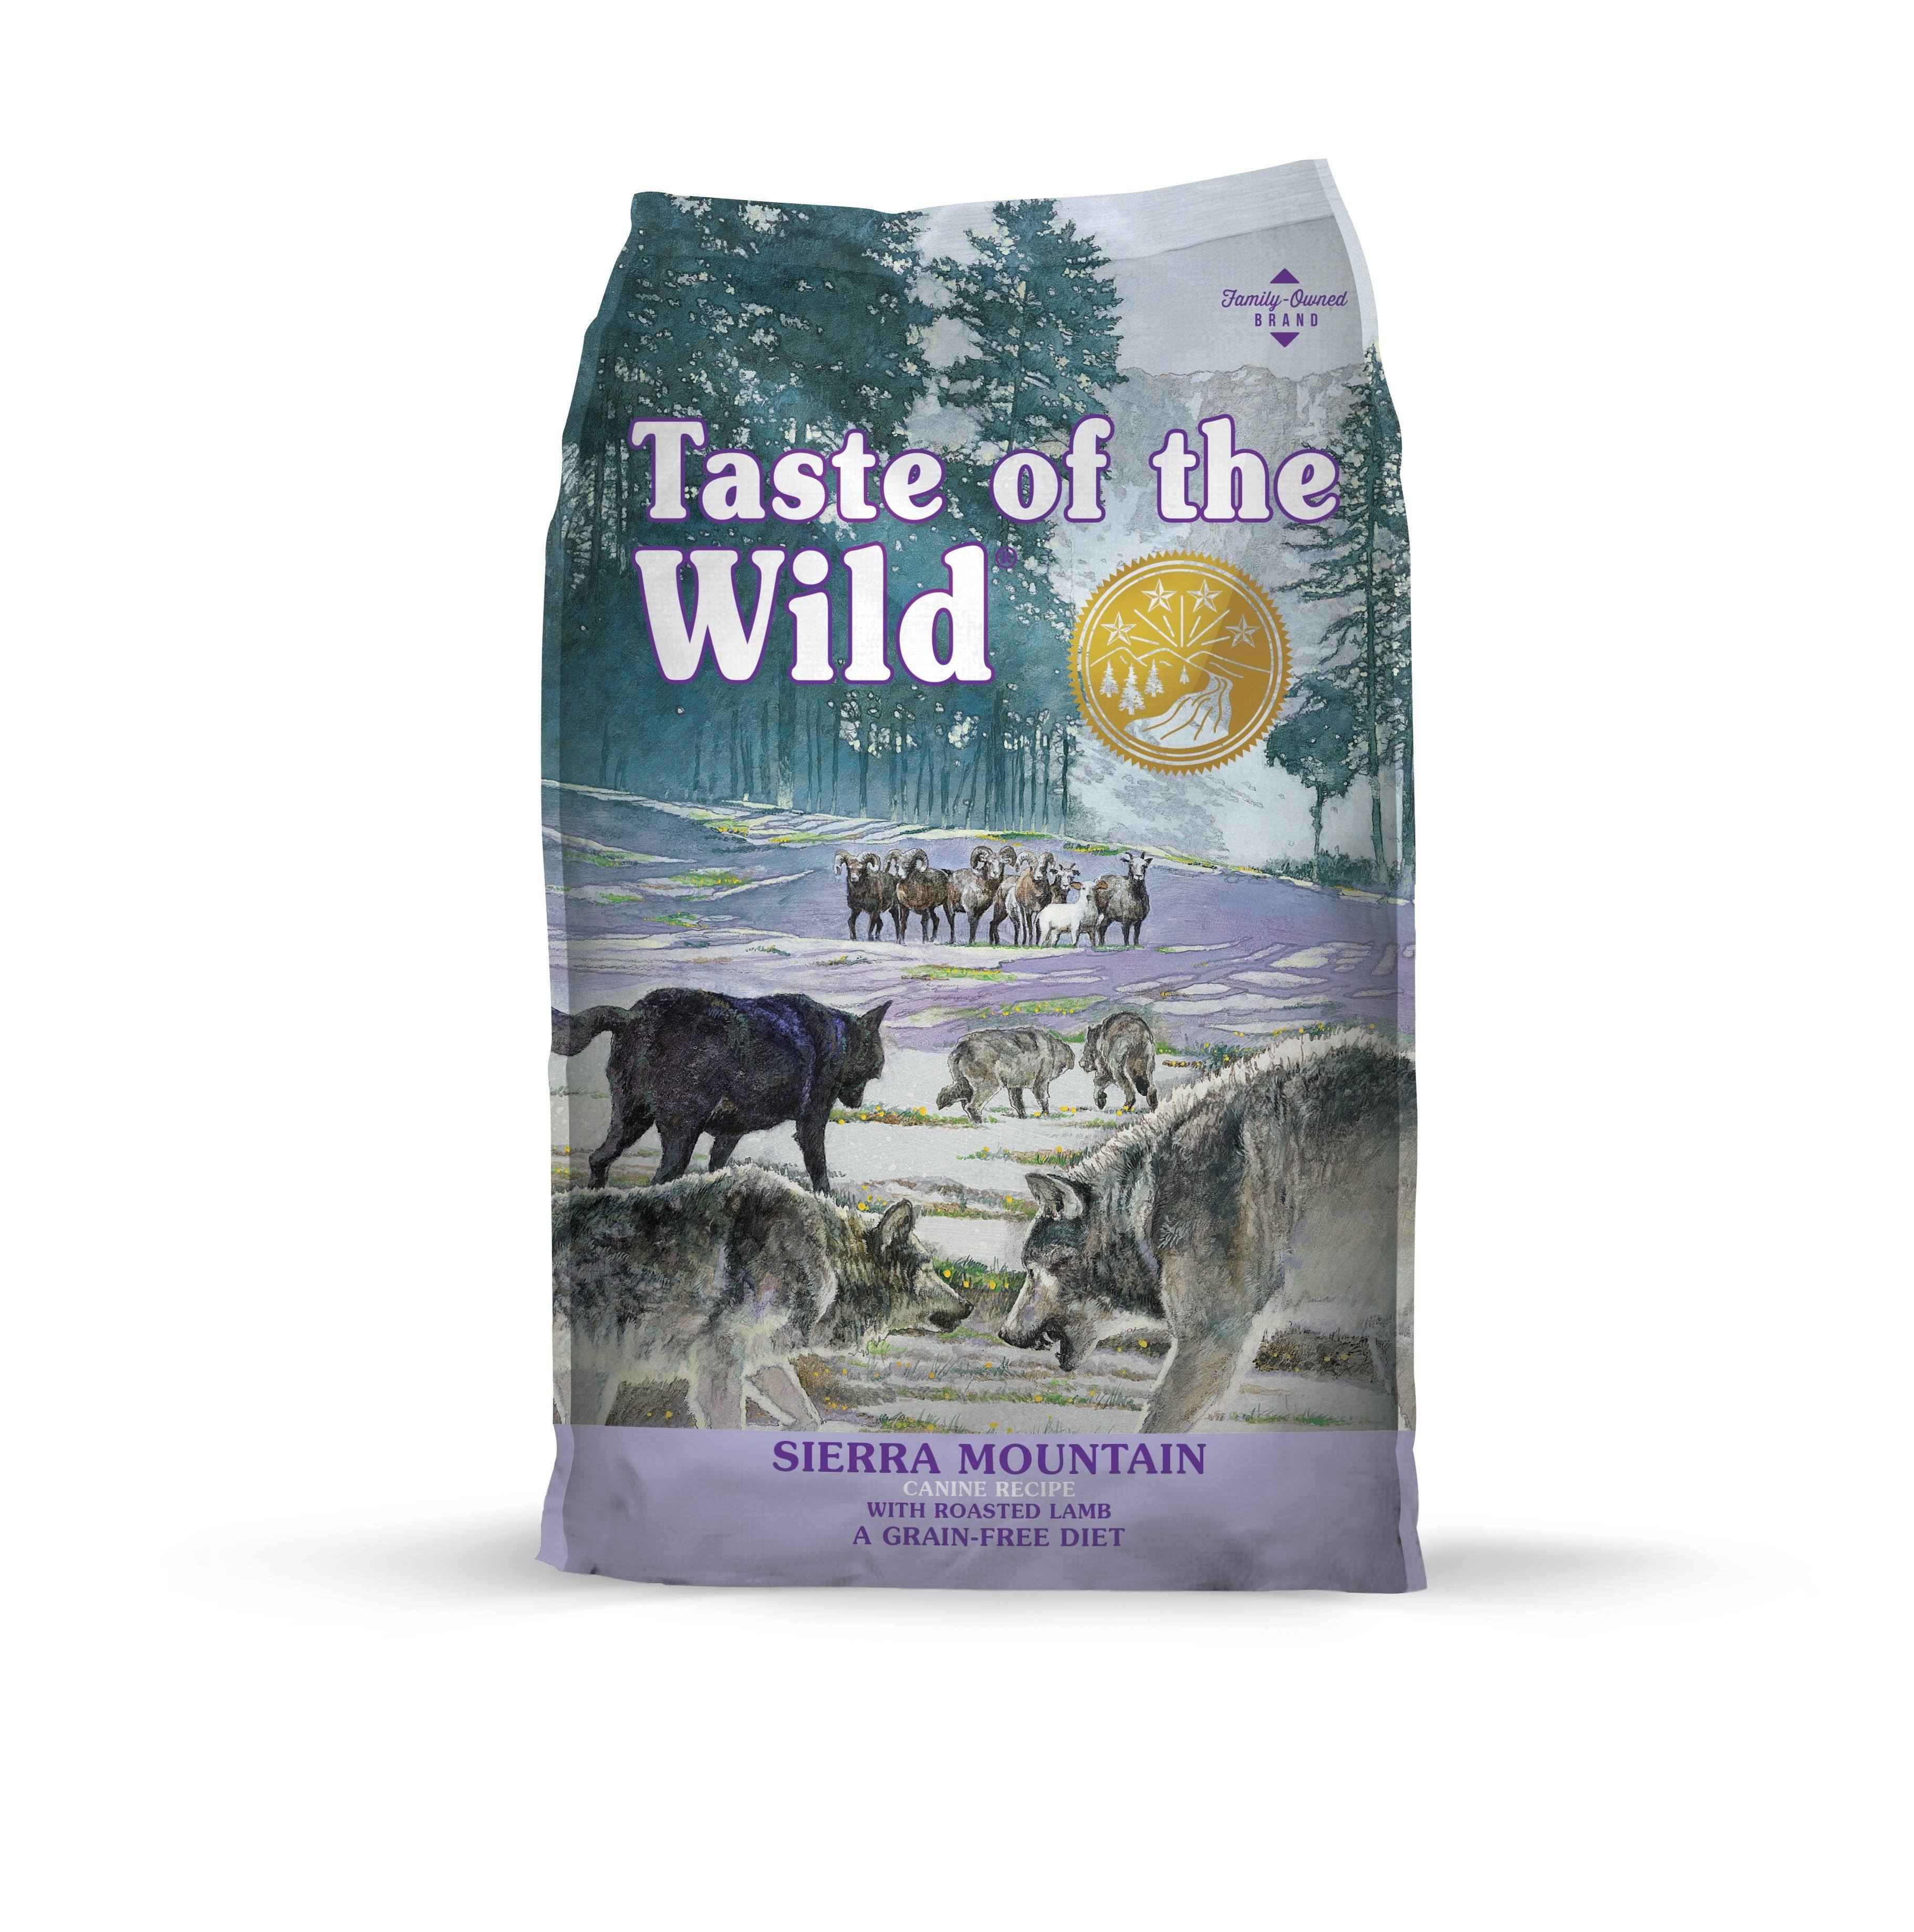 Taste of the Wild Sierra Mountain with Roasted Lamb Dog Food [28lb]